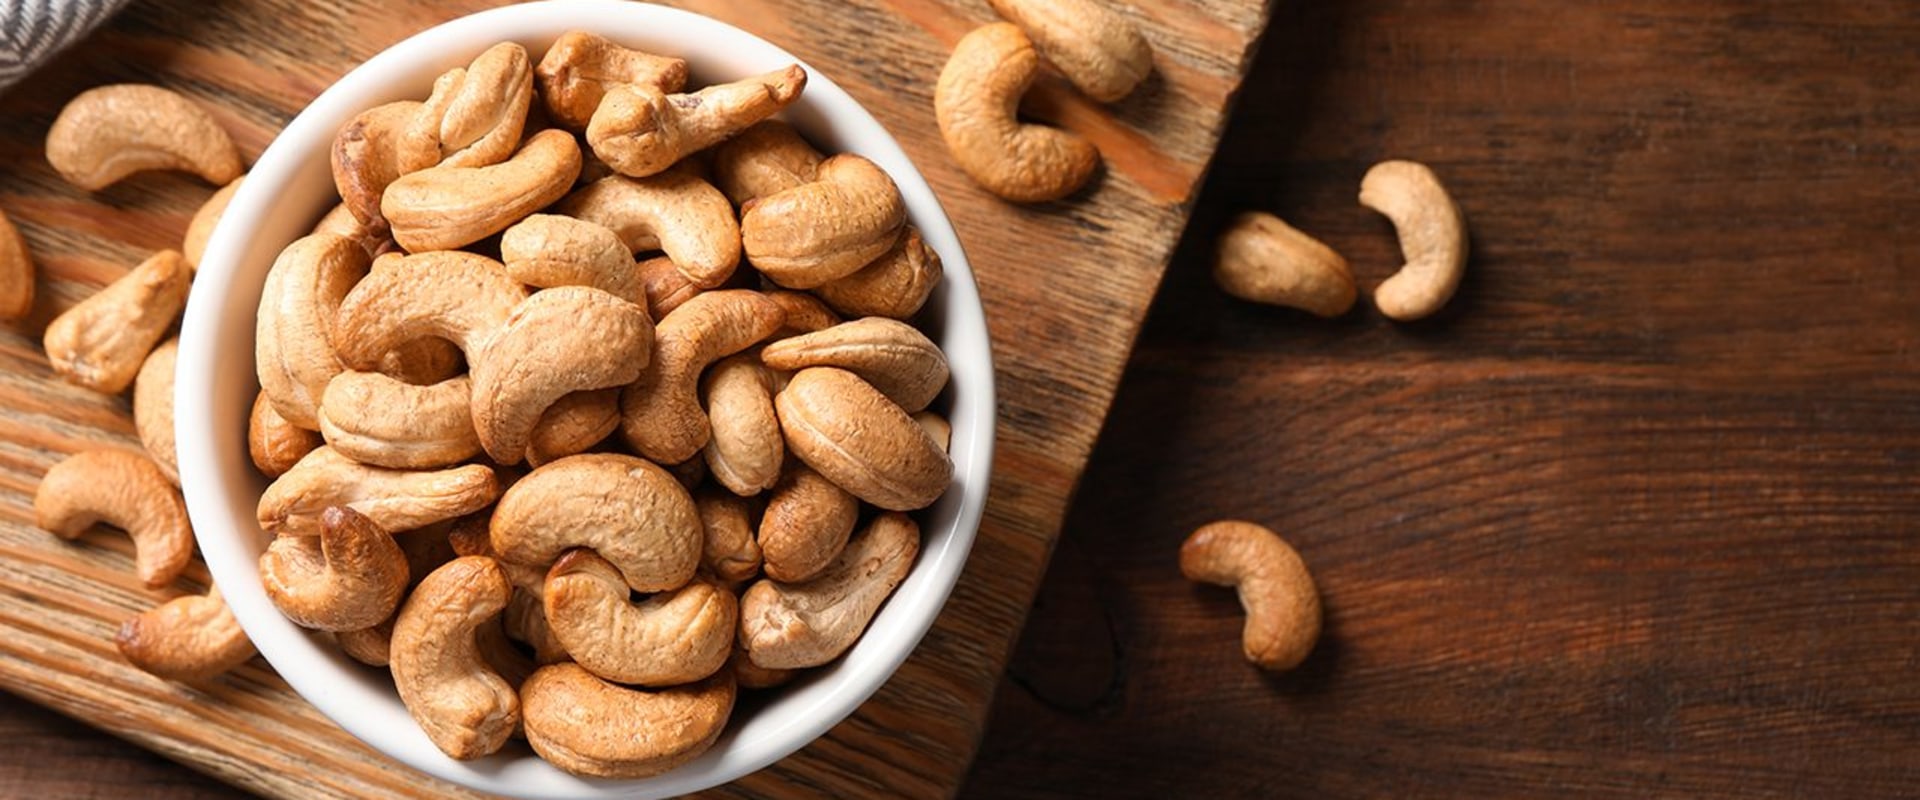 Is it ok to eat cashew nuts everyday?